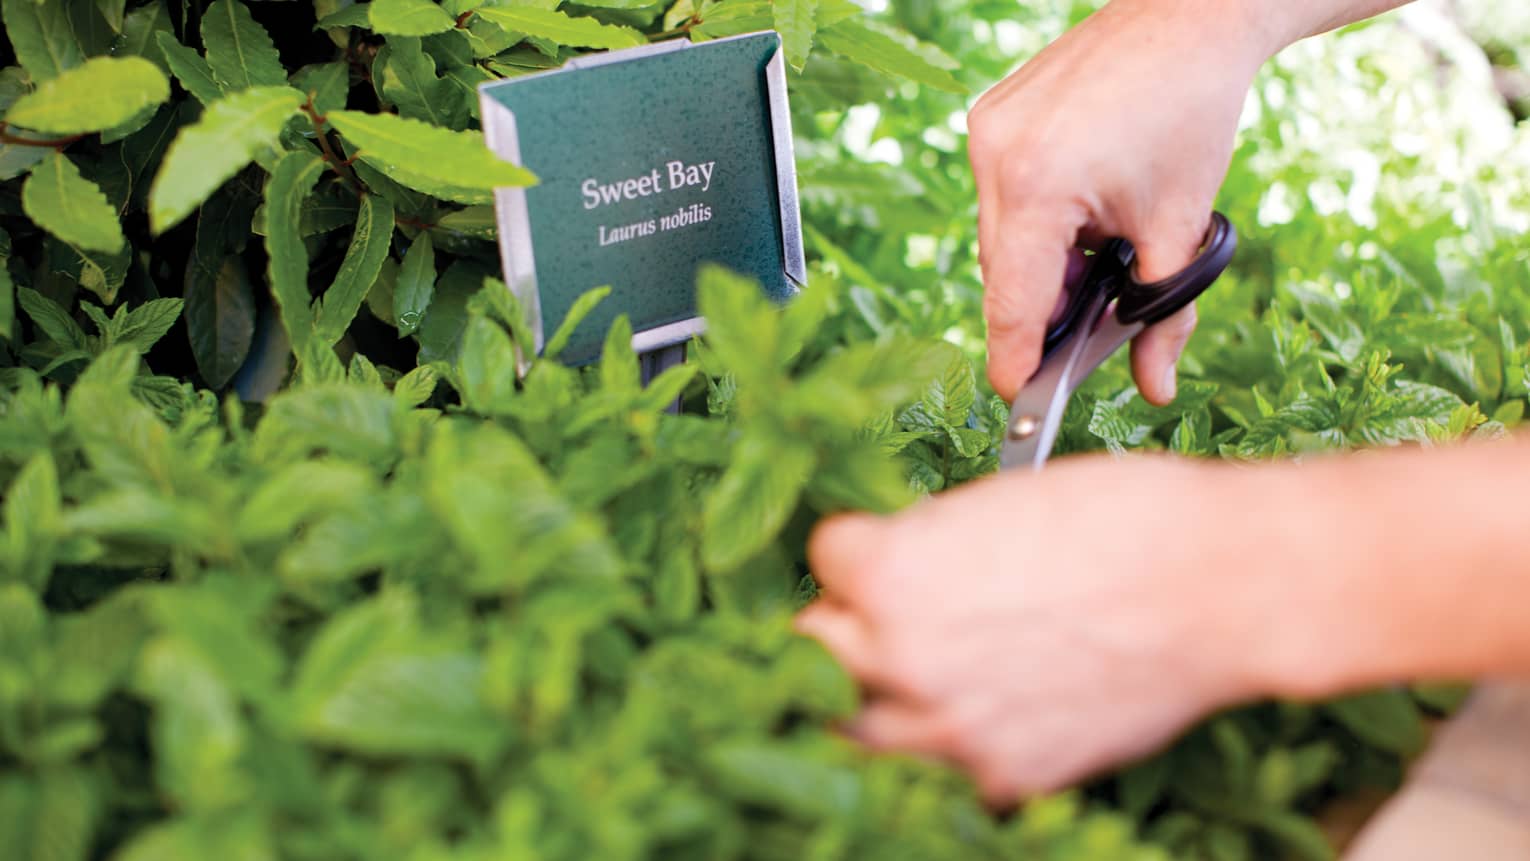 Close-up of hands clipping green herbs with scissors in garden